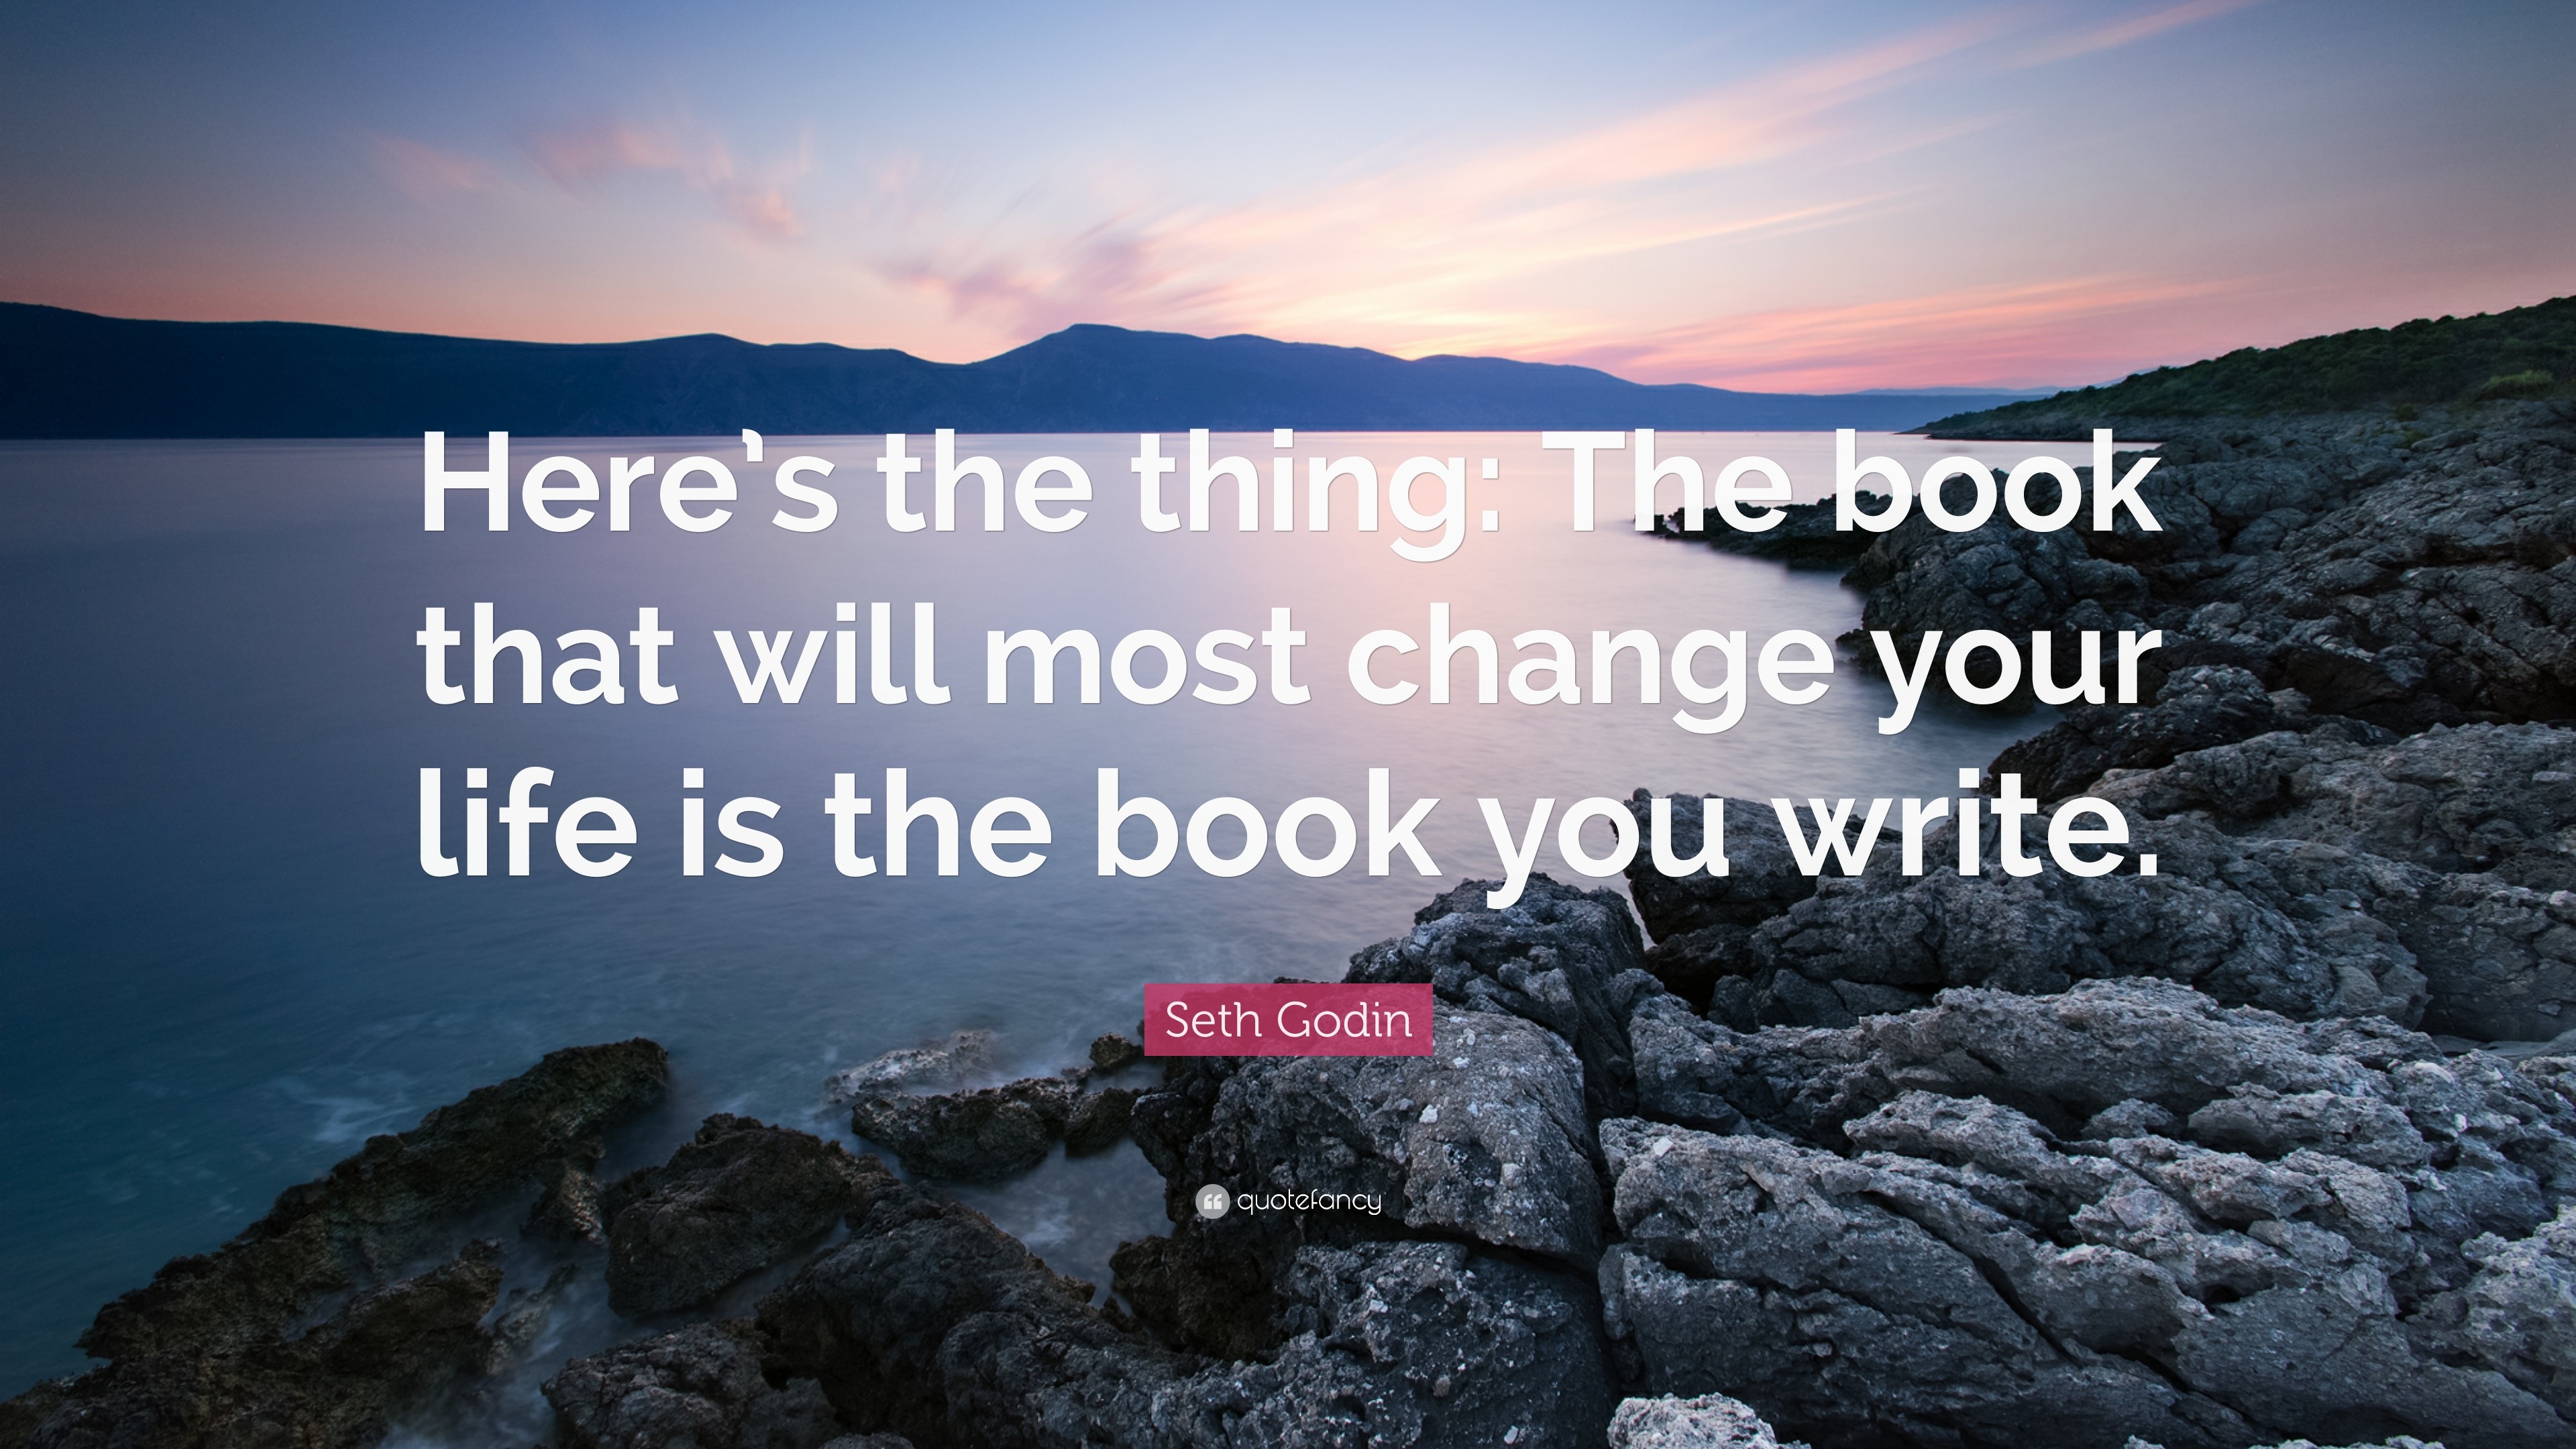 Seth Godin Quote: “Here’s the thing: The book that will most change ...